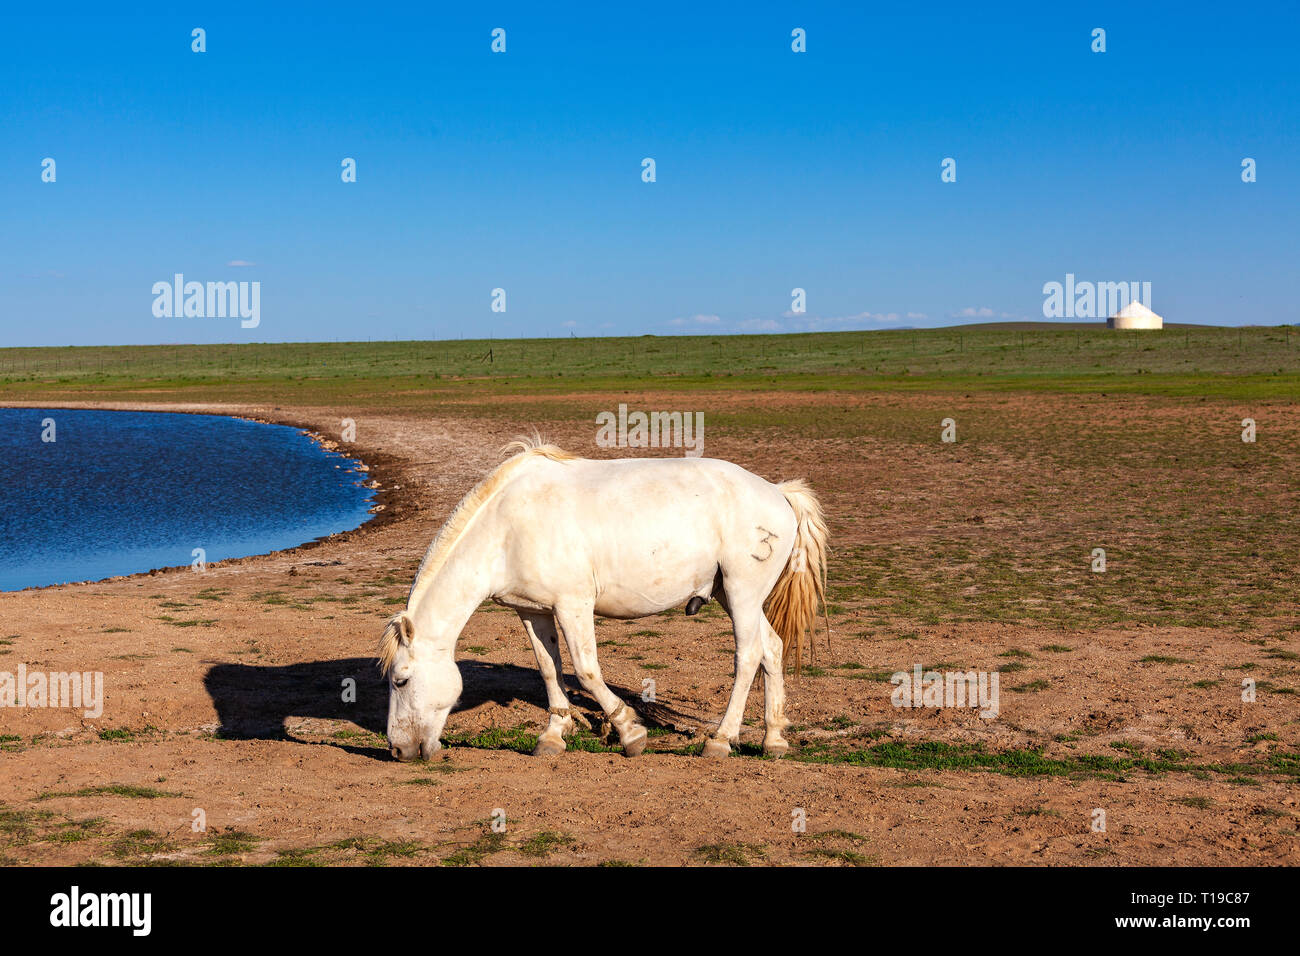 A white horse  at the Gegentala grasslands north of Hohhot in Inner Mongolia, China. Stock Photo